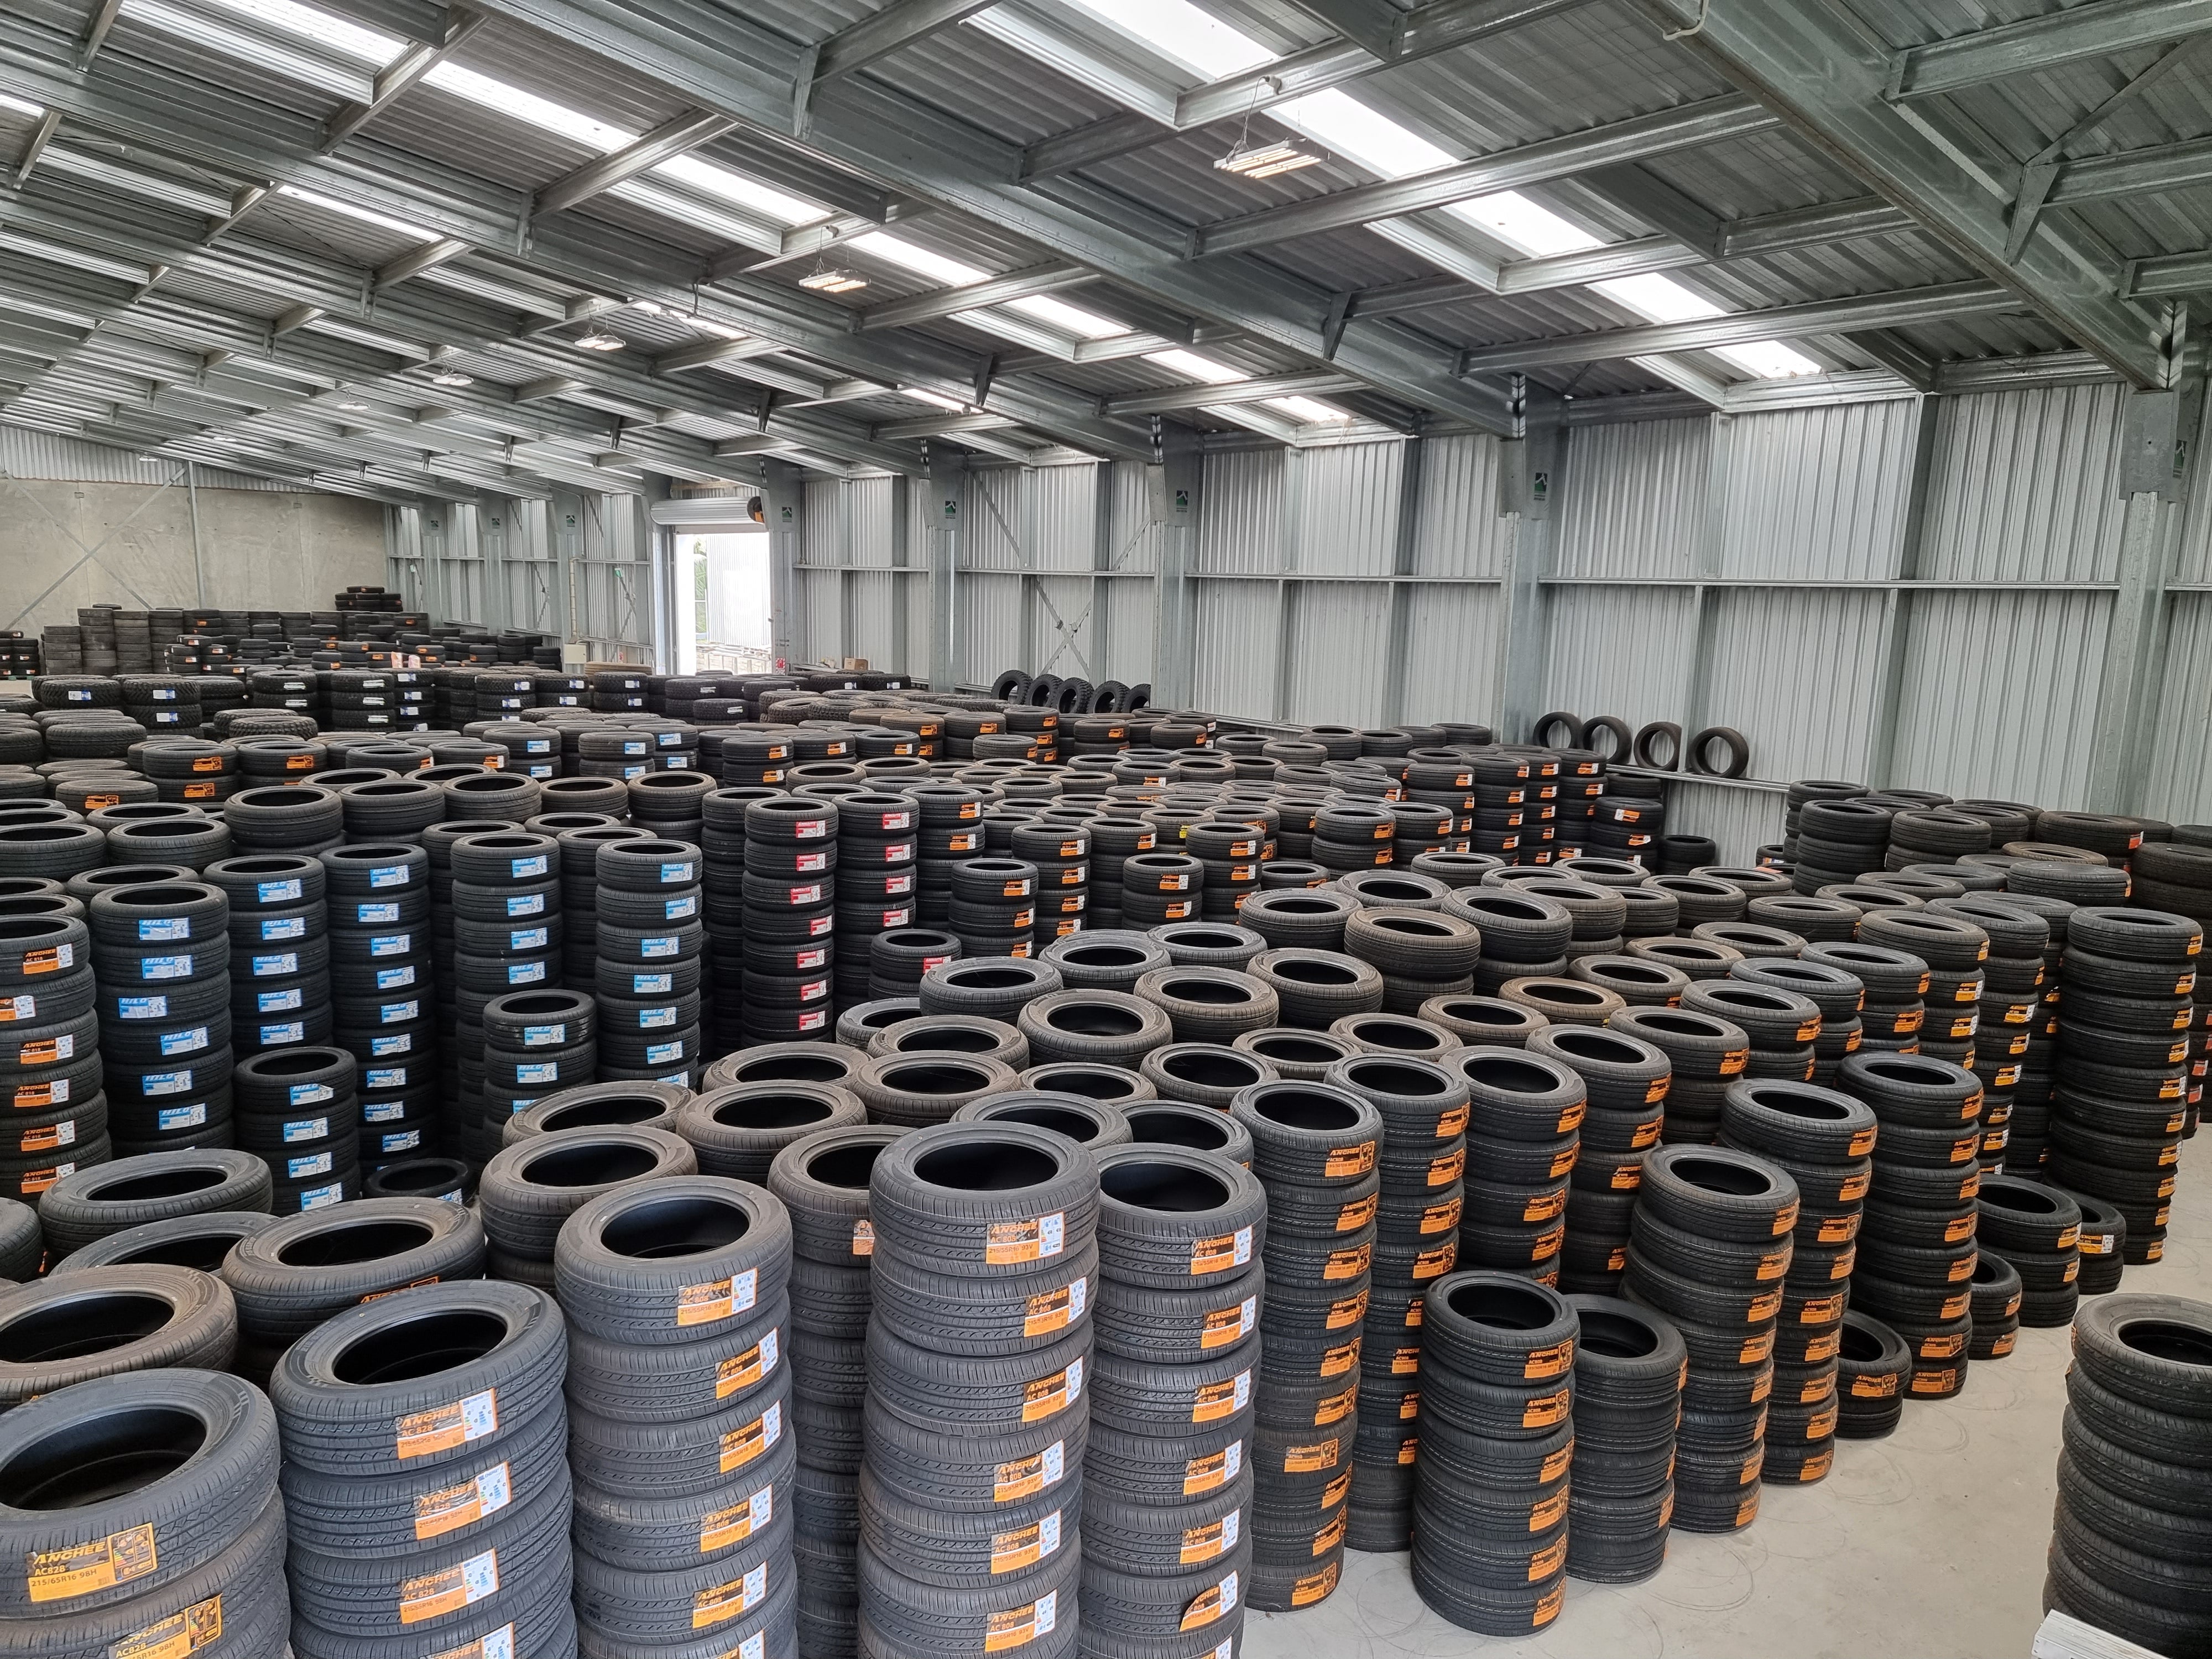 Over 15,000 Tyres in stock